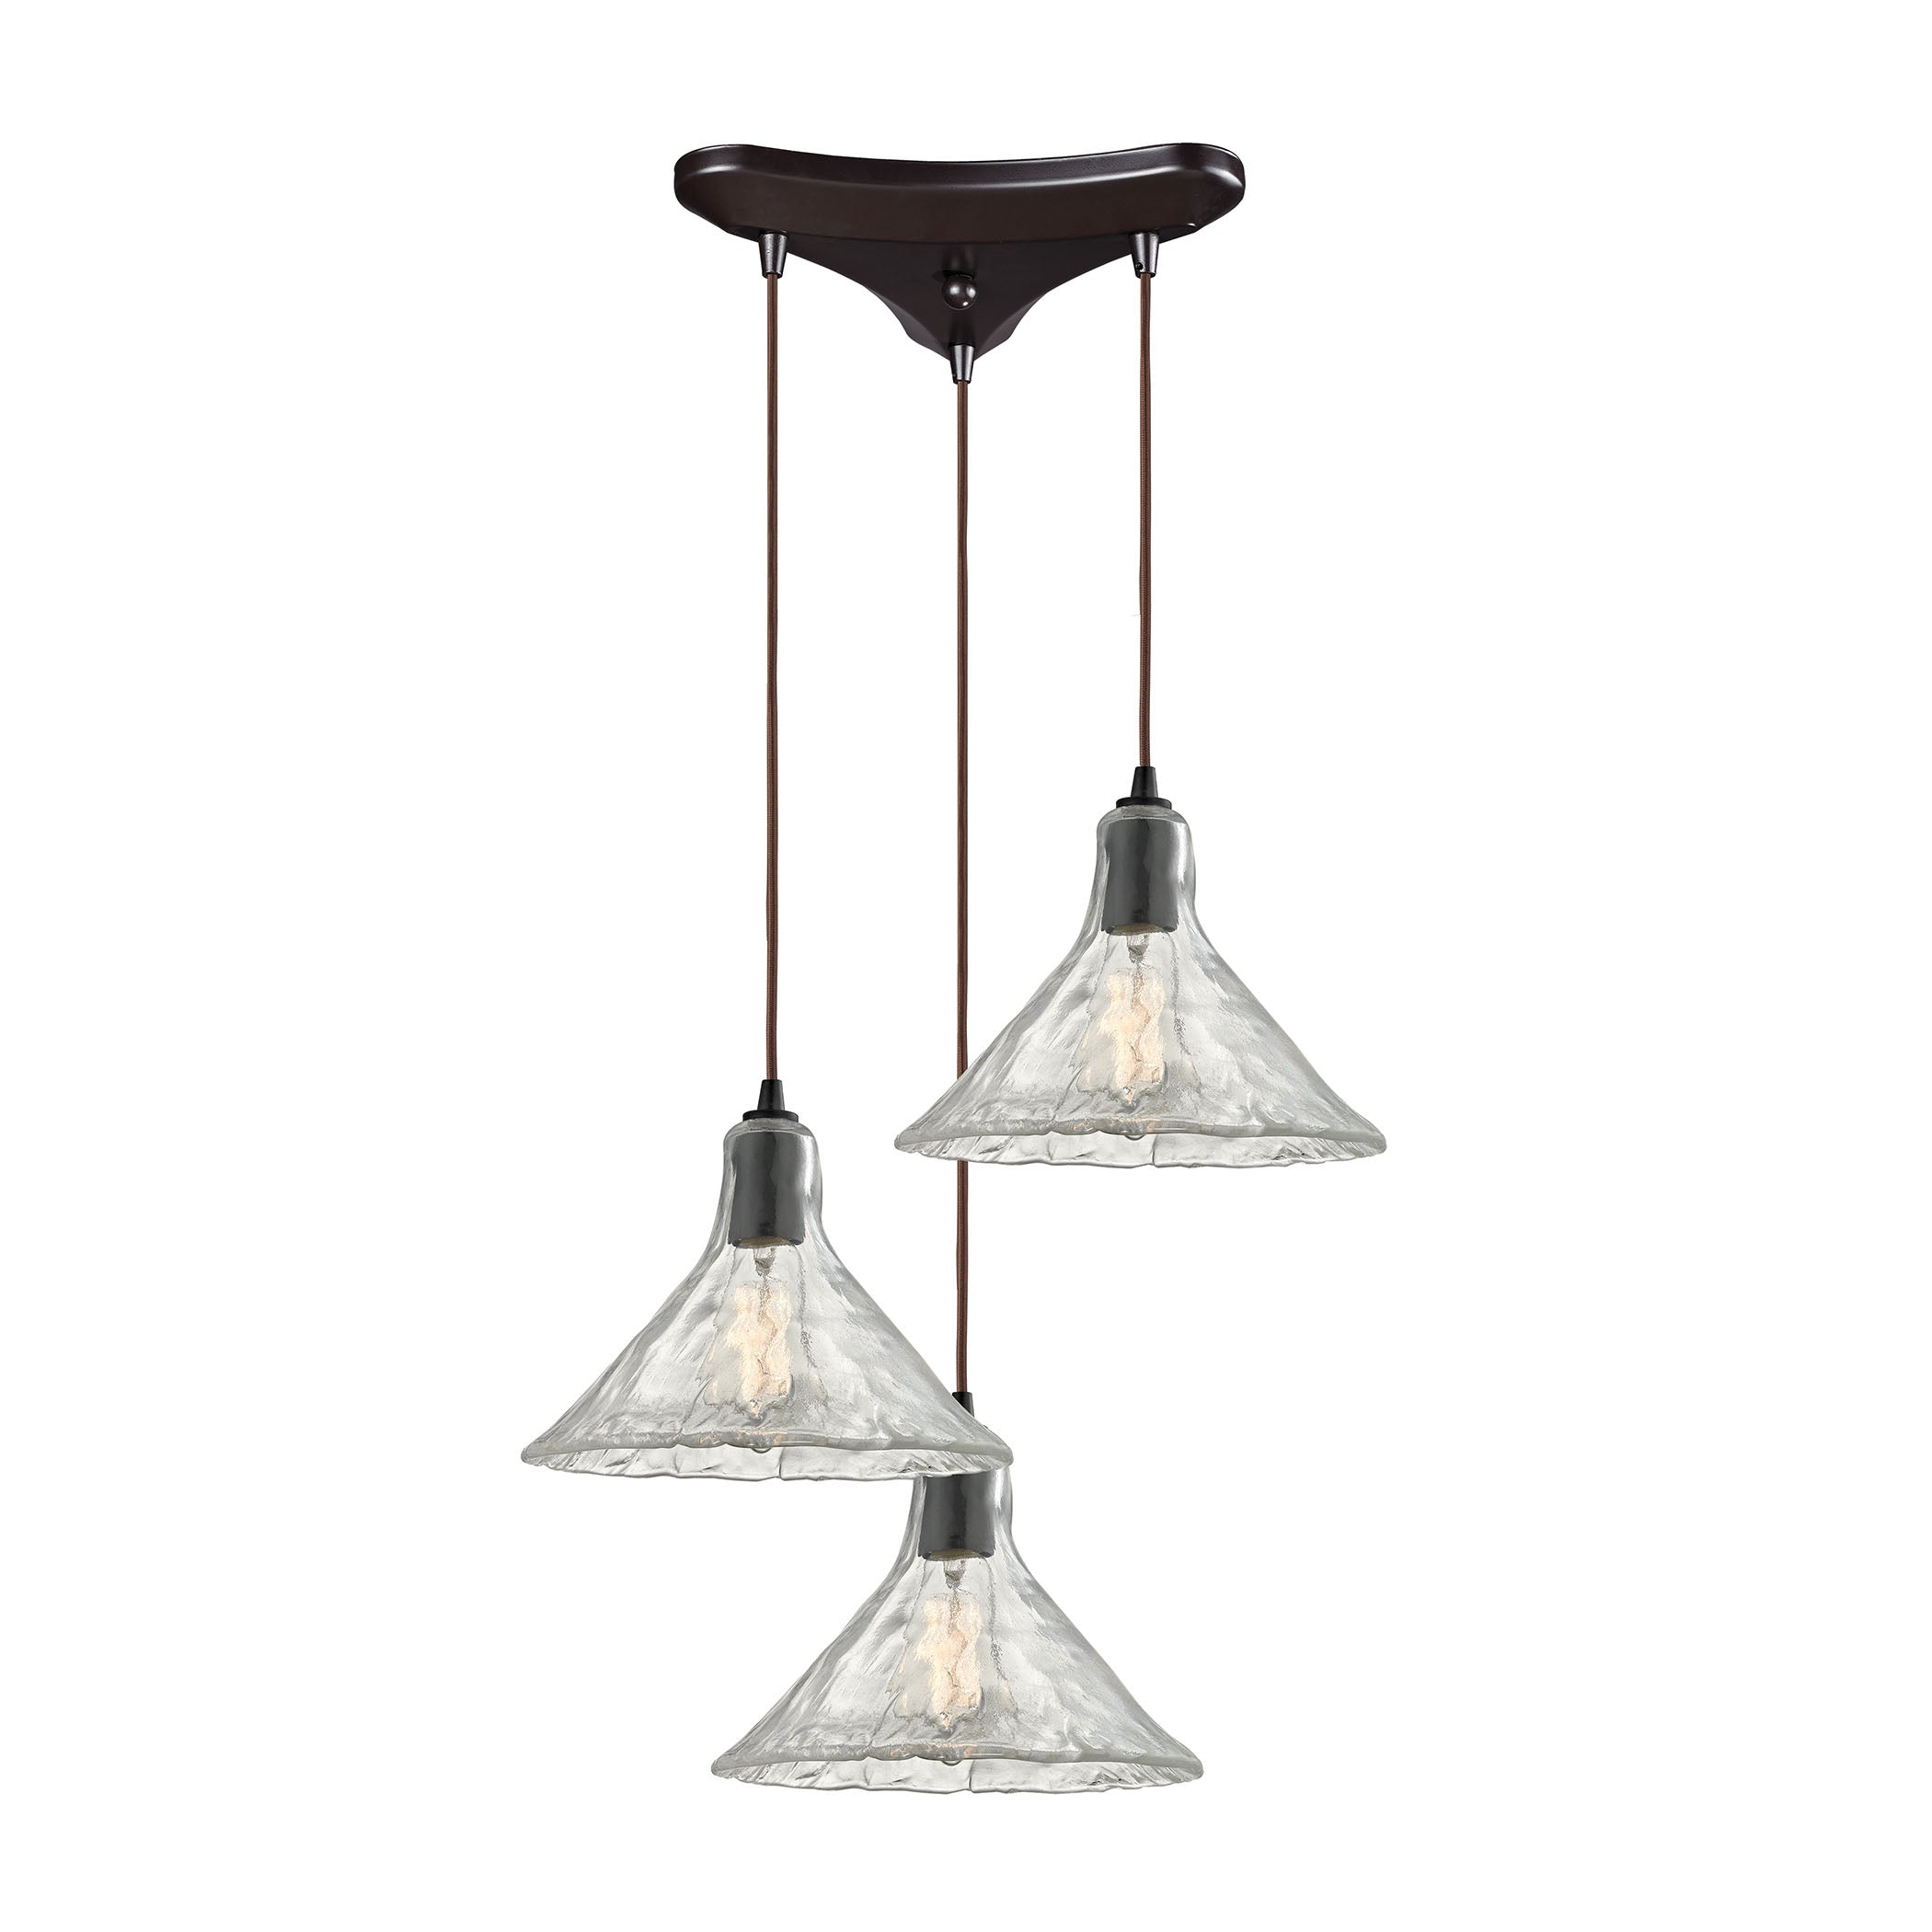 ELK Lighting 10435/3 Hand Formed Glass 3-Light Triangular Pendant Fixture in Oiled Bronze with Clear Hand-formed Glass